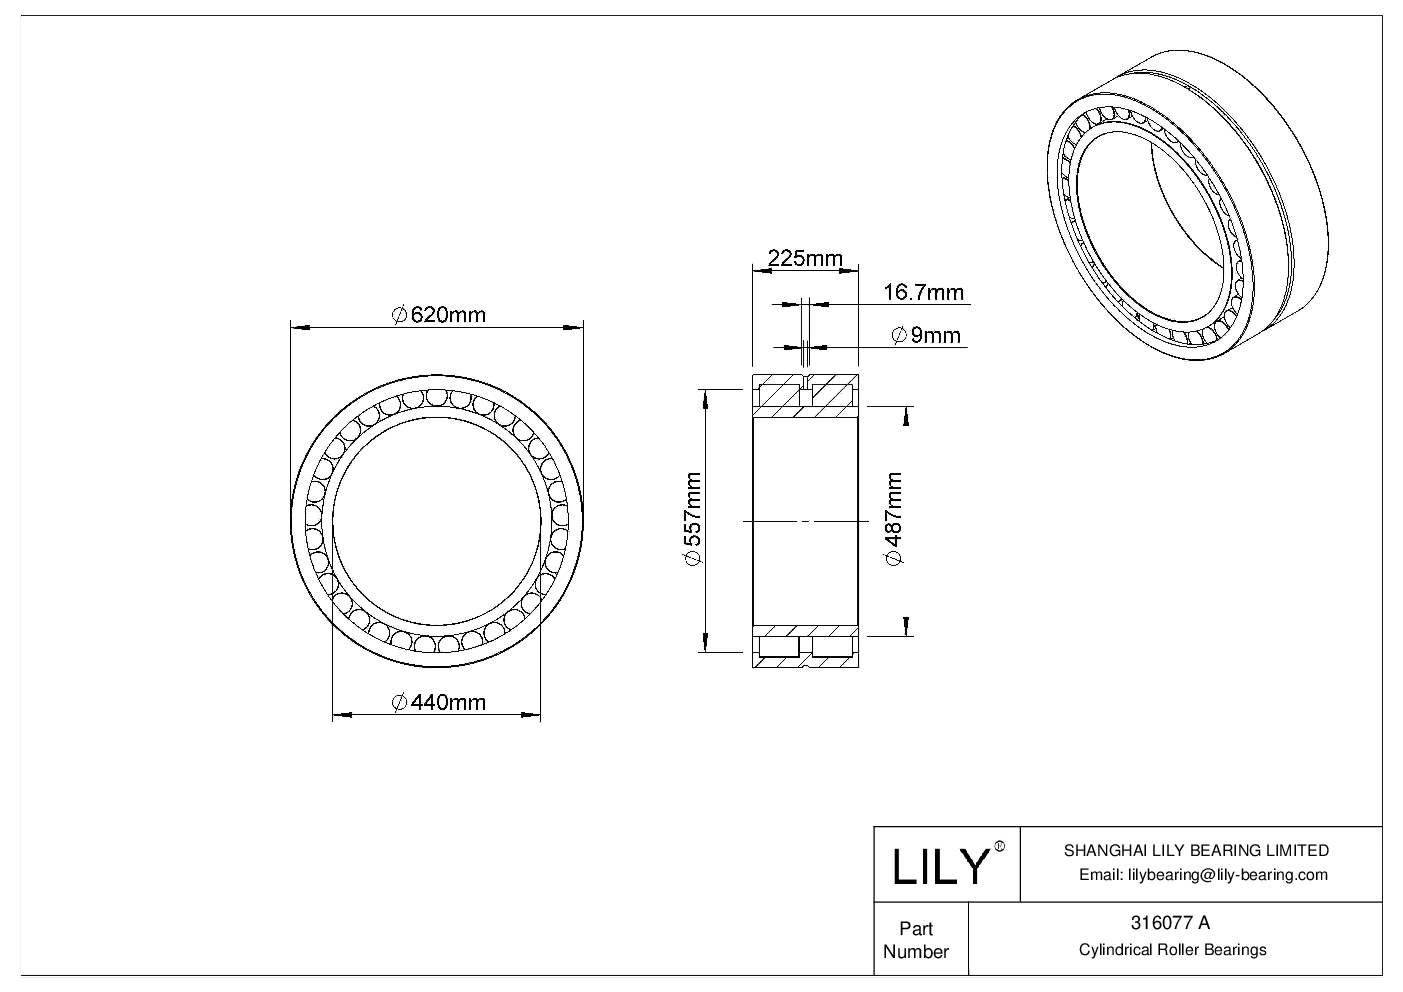 316077 A Double Row Cylindrical Roller Bearings cad drawing